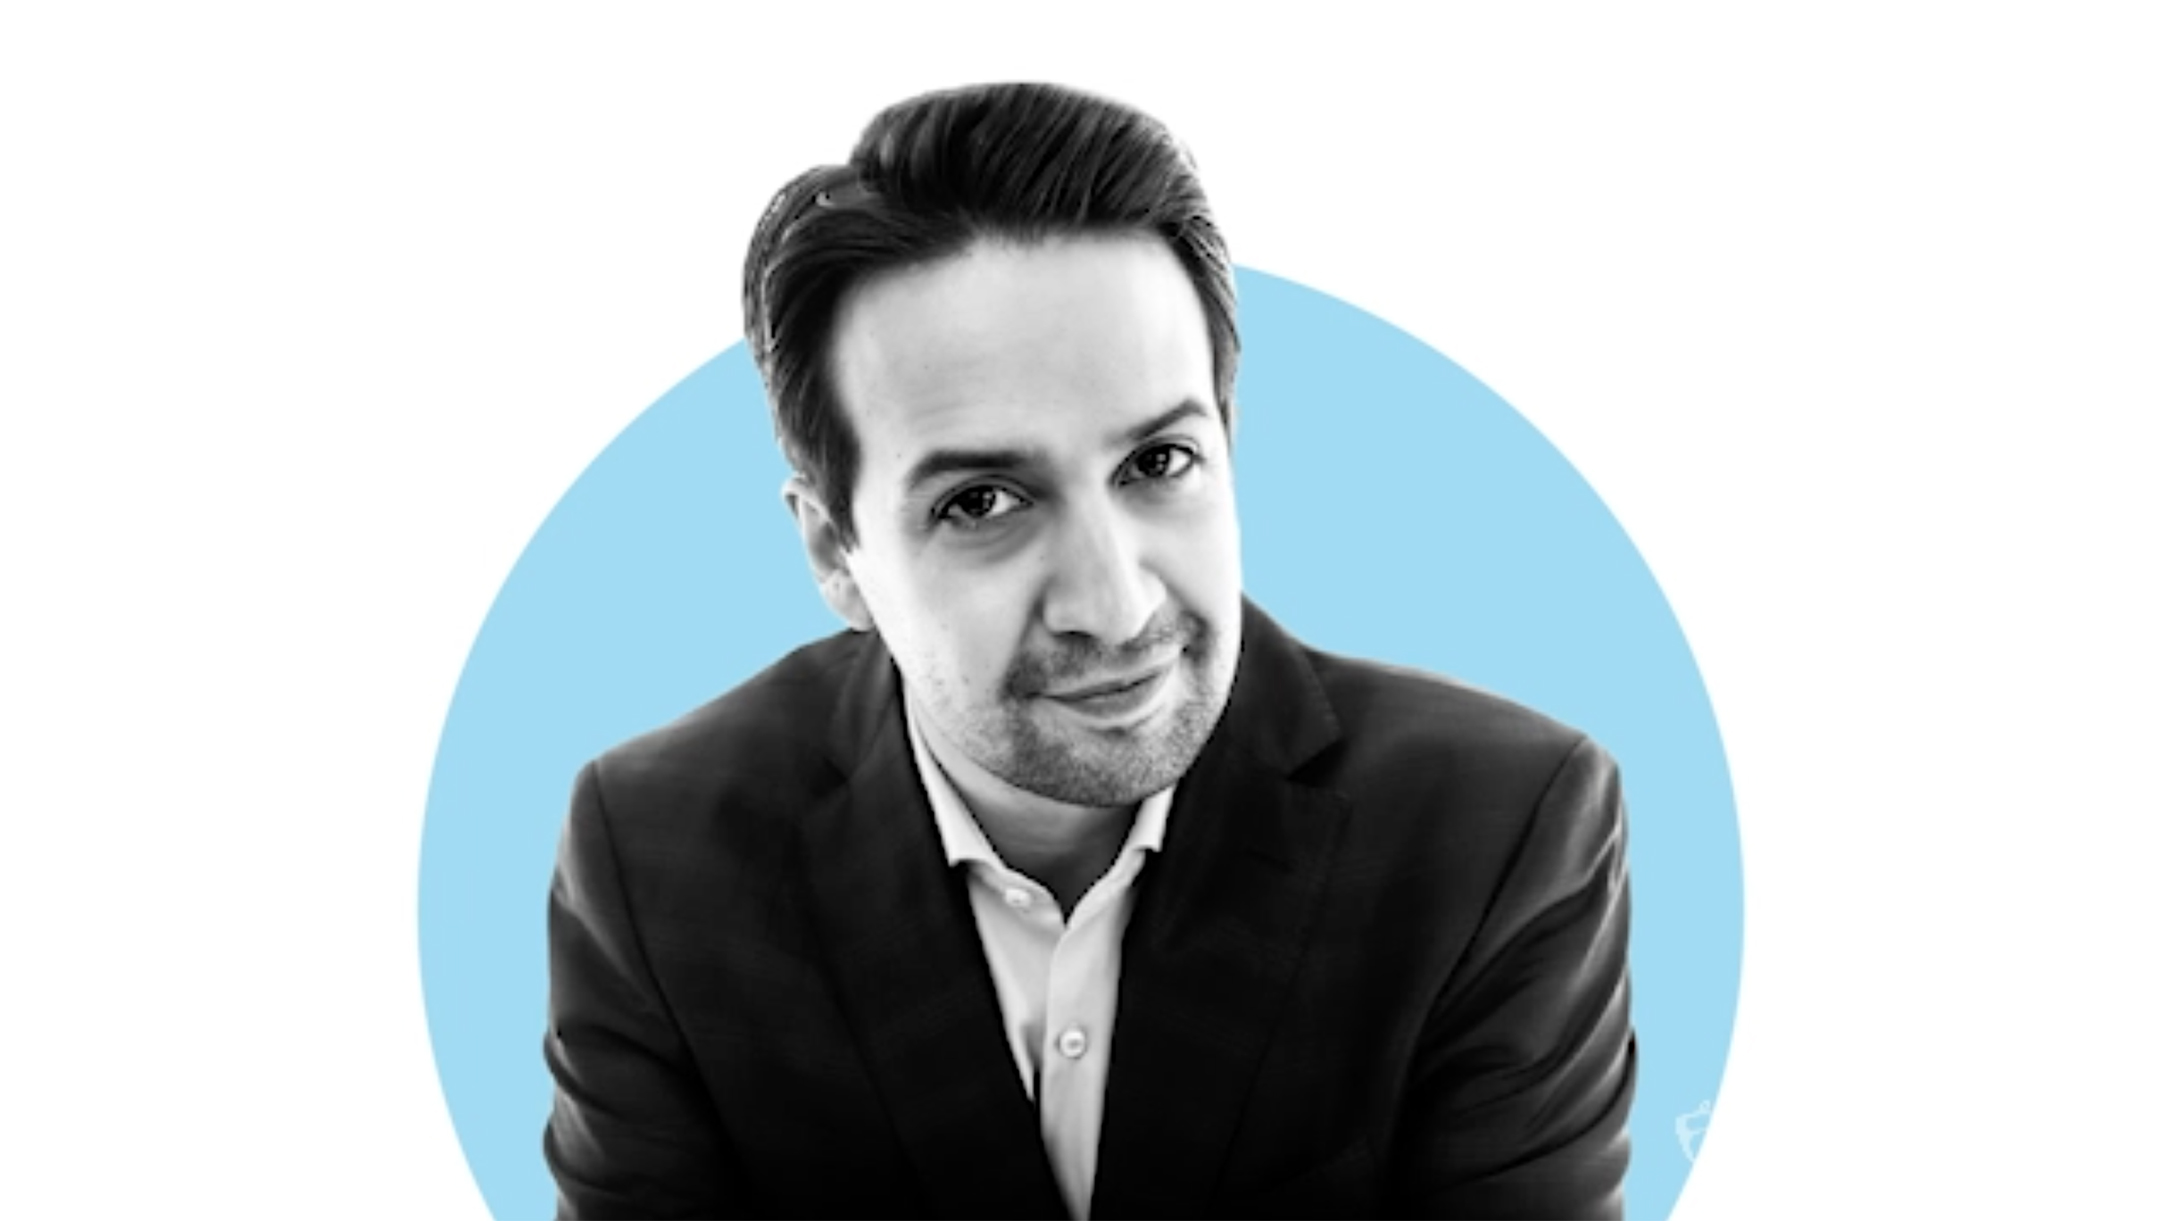 Black and white photo of Lin Manuel miranda in front of a blue dot against a white background